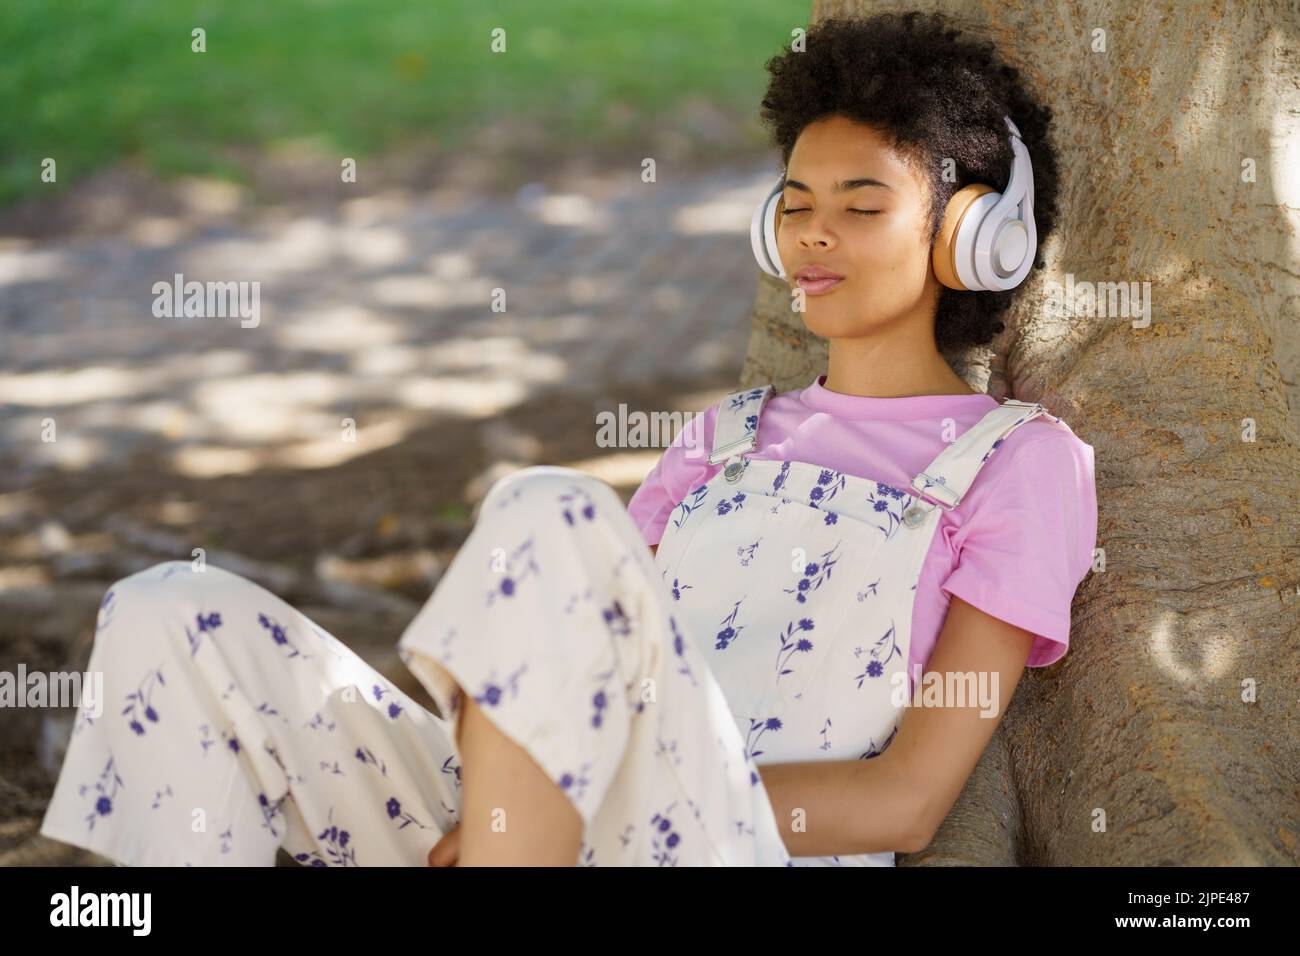 Black woman listening to song in park Stock Photo